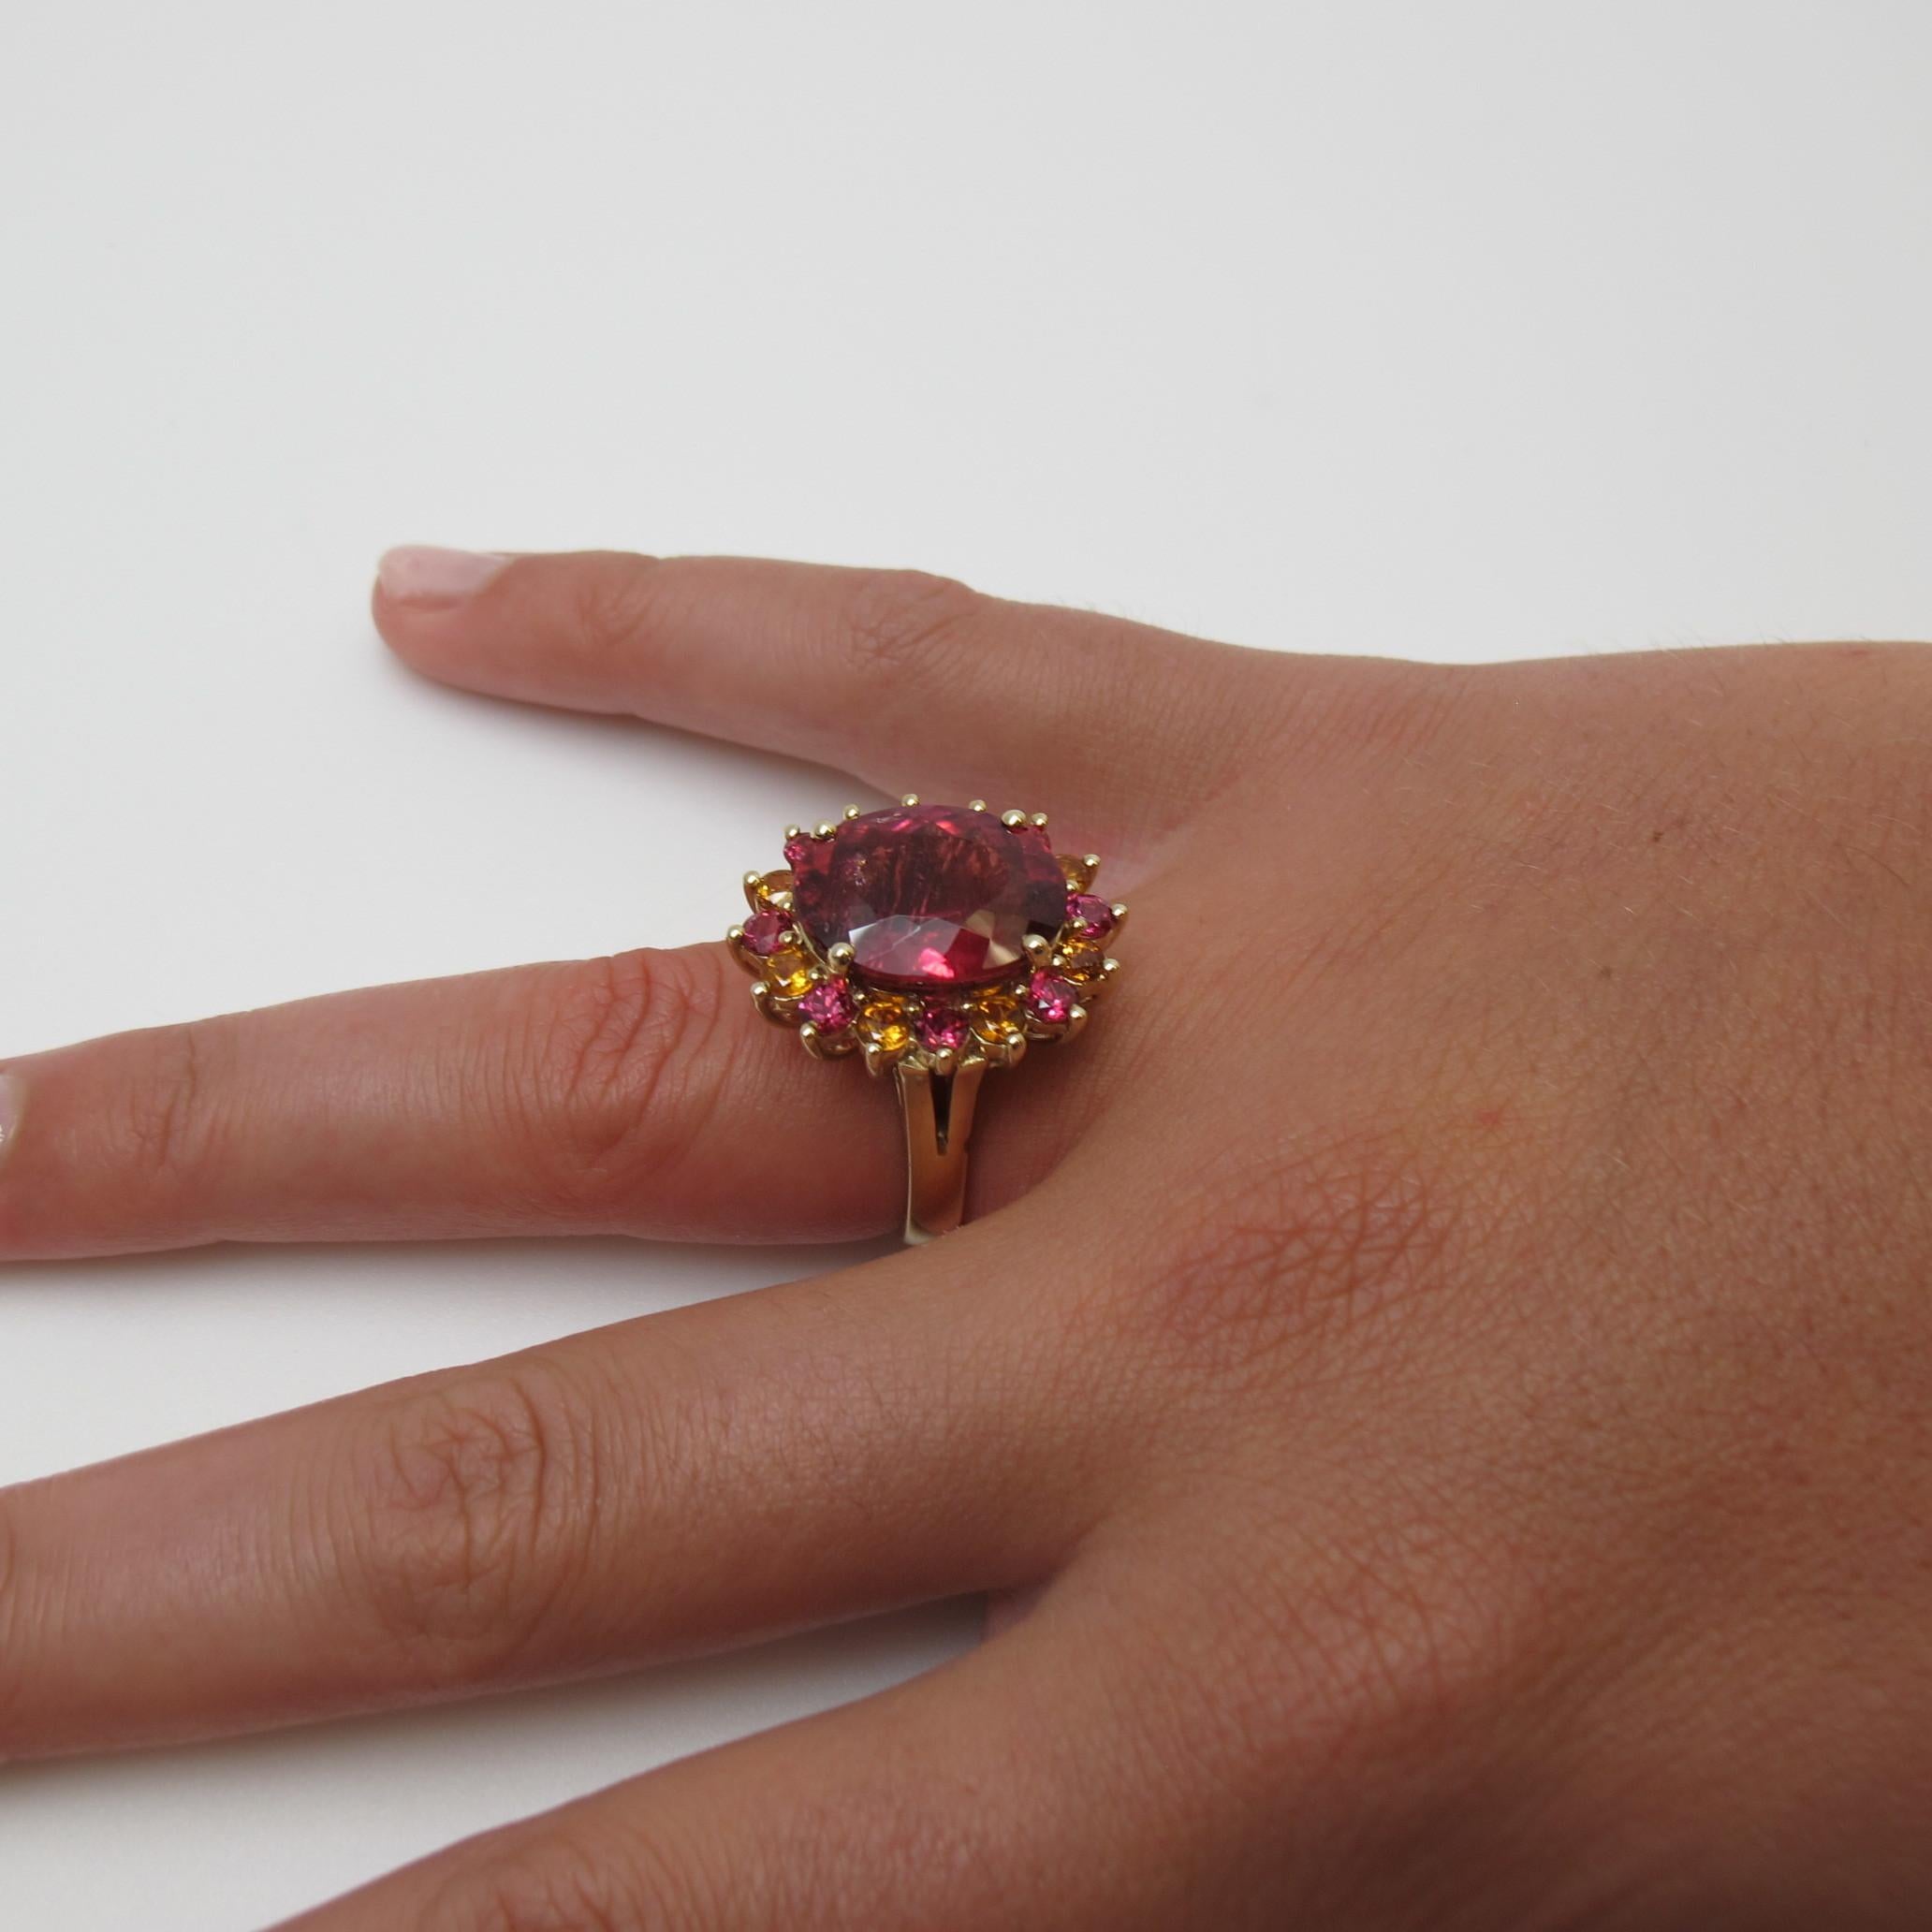 Oval Cut 9.71 Carat Pink Tourmaline with Citrine and Pink Spinel 14 Karat Gold Ring